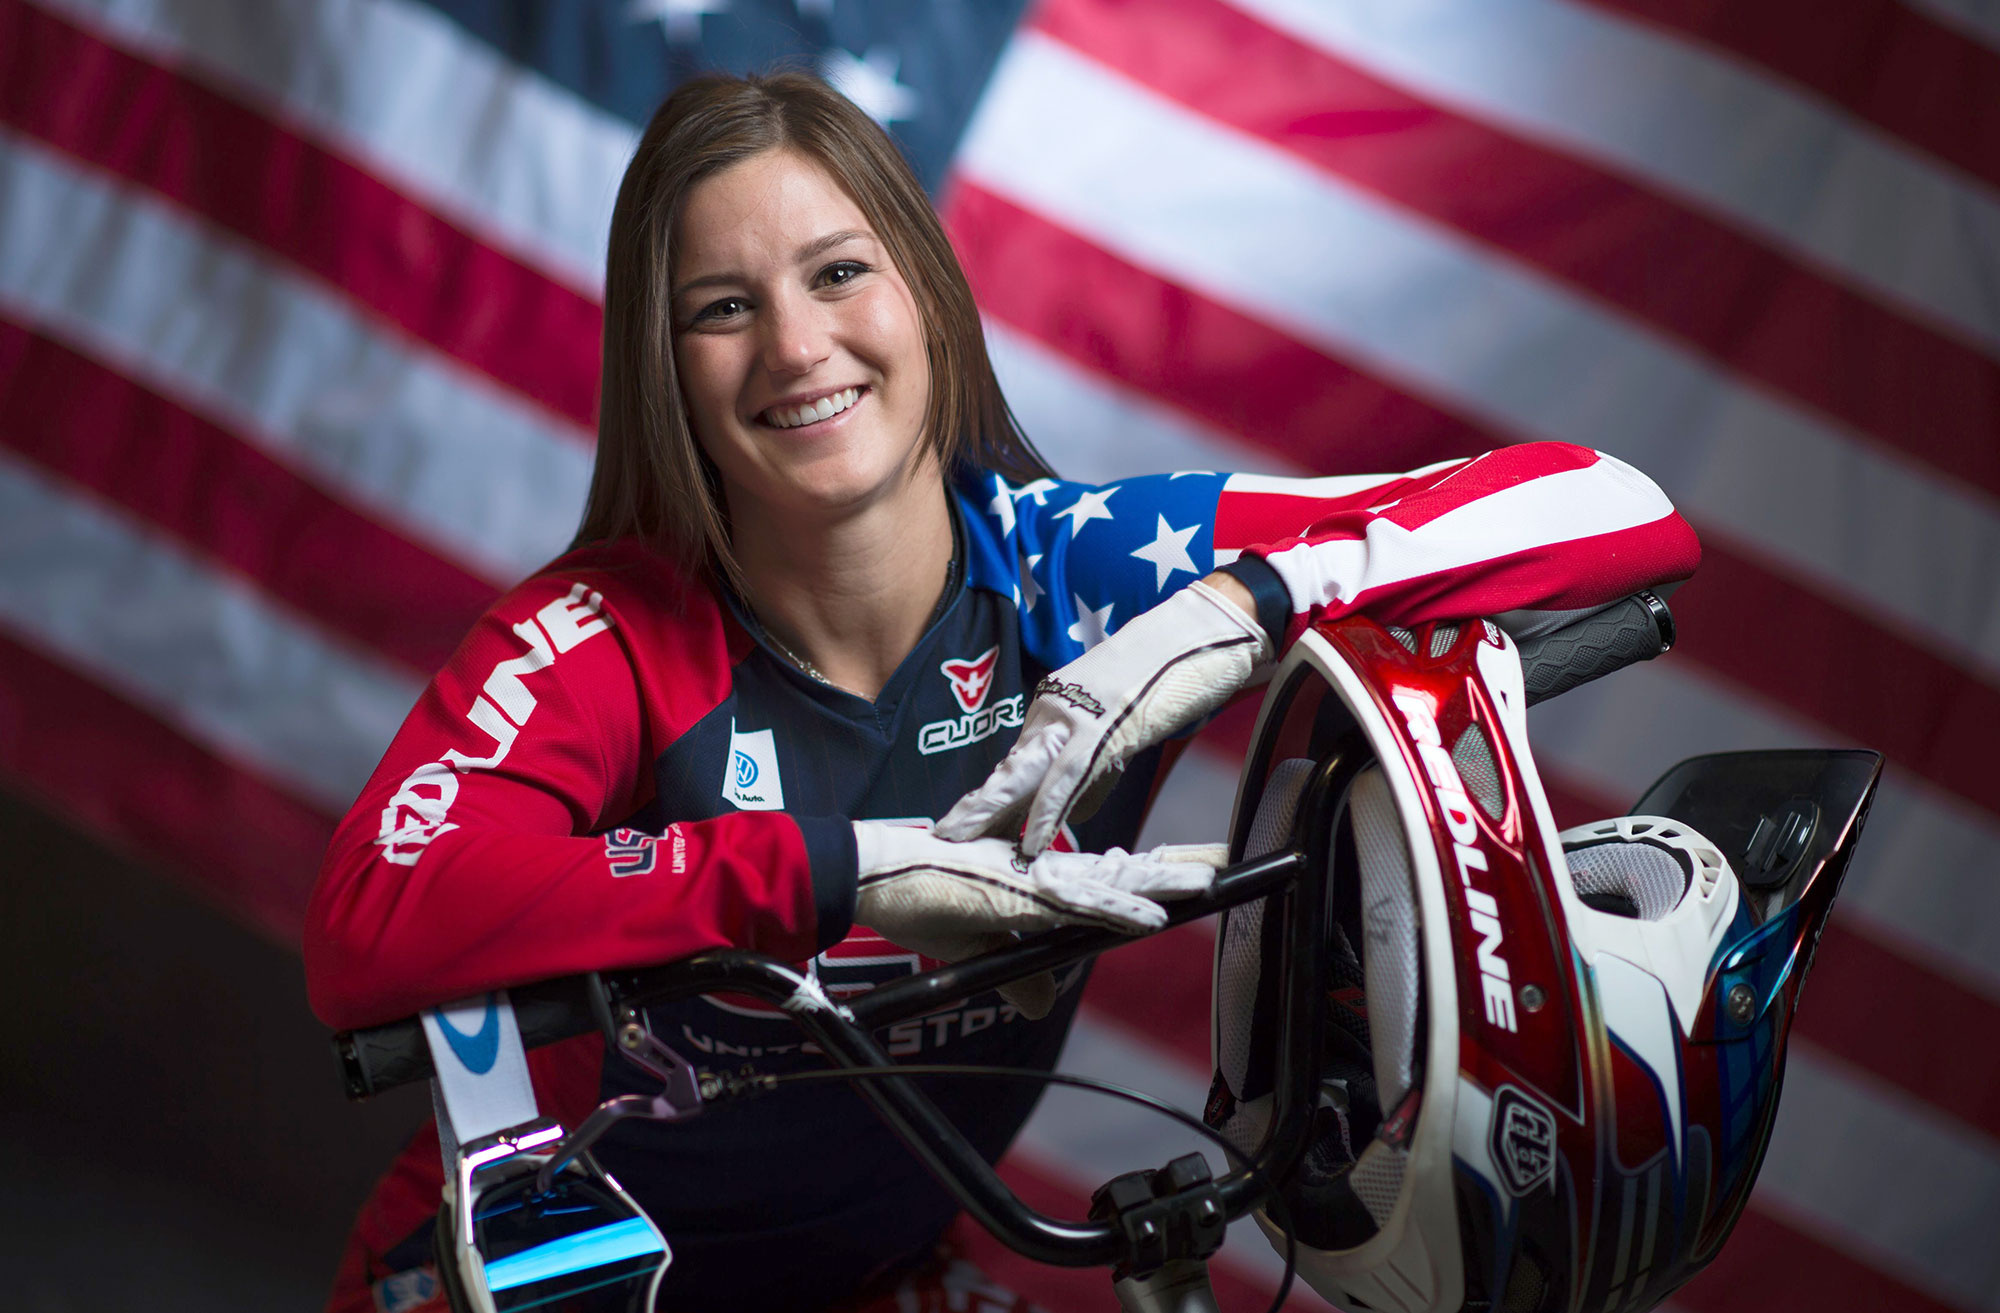 Alise Willoughby, Olympic BMXer, Personal insights, Behind the scenes, 2000x1320 HD Desktop